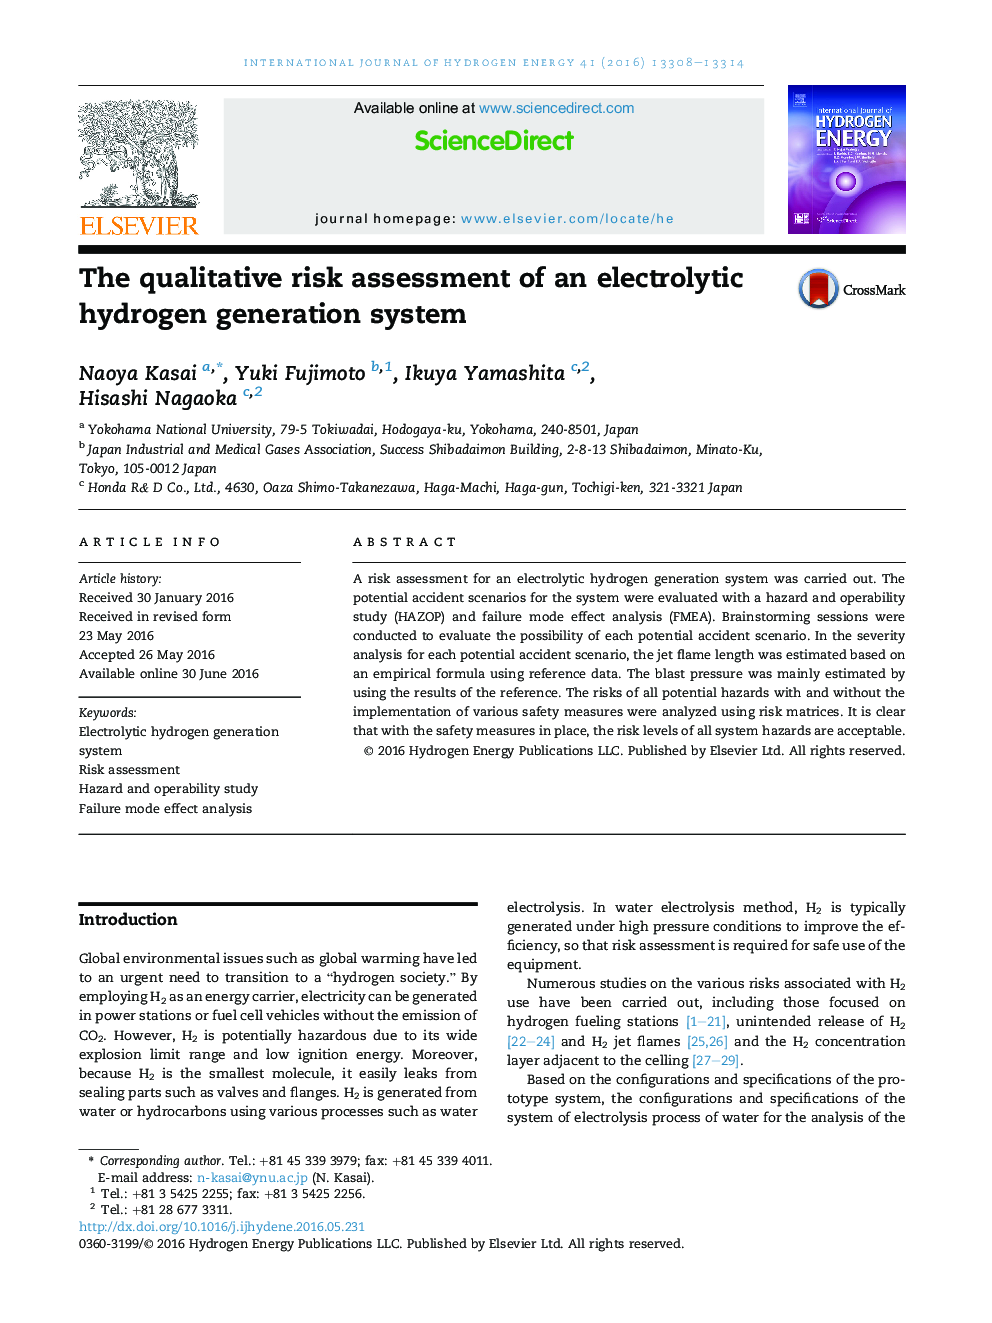 The qualitative risk assessment of an electrolytic hydrogen generation system